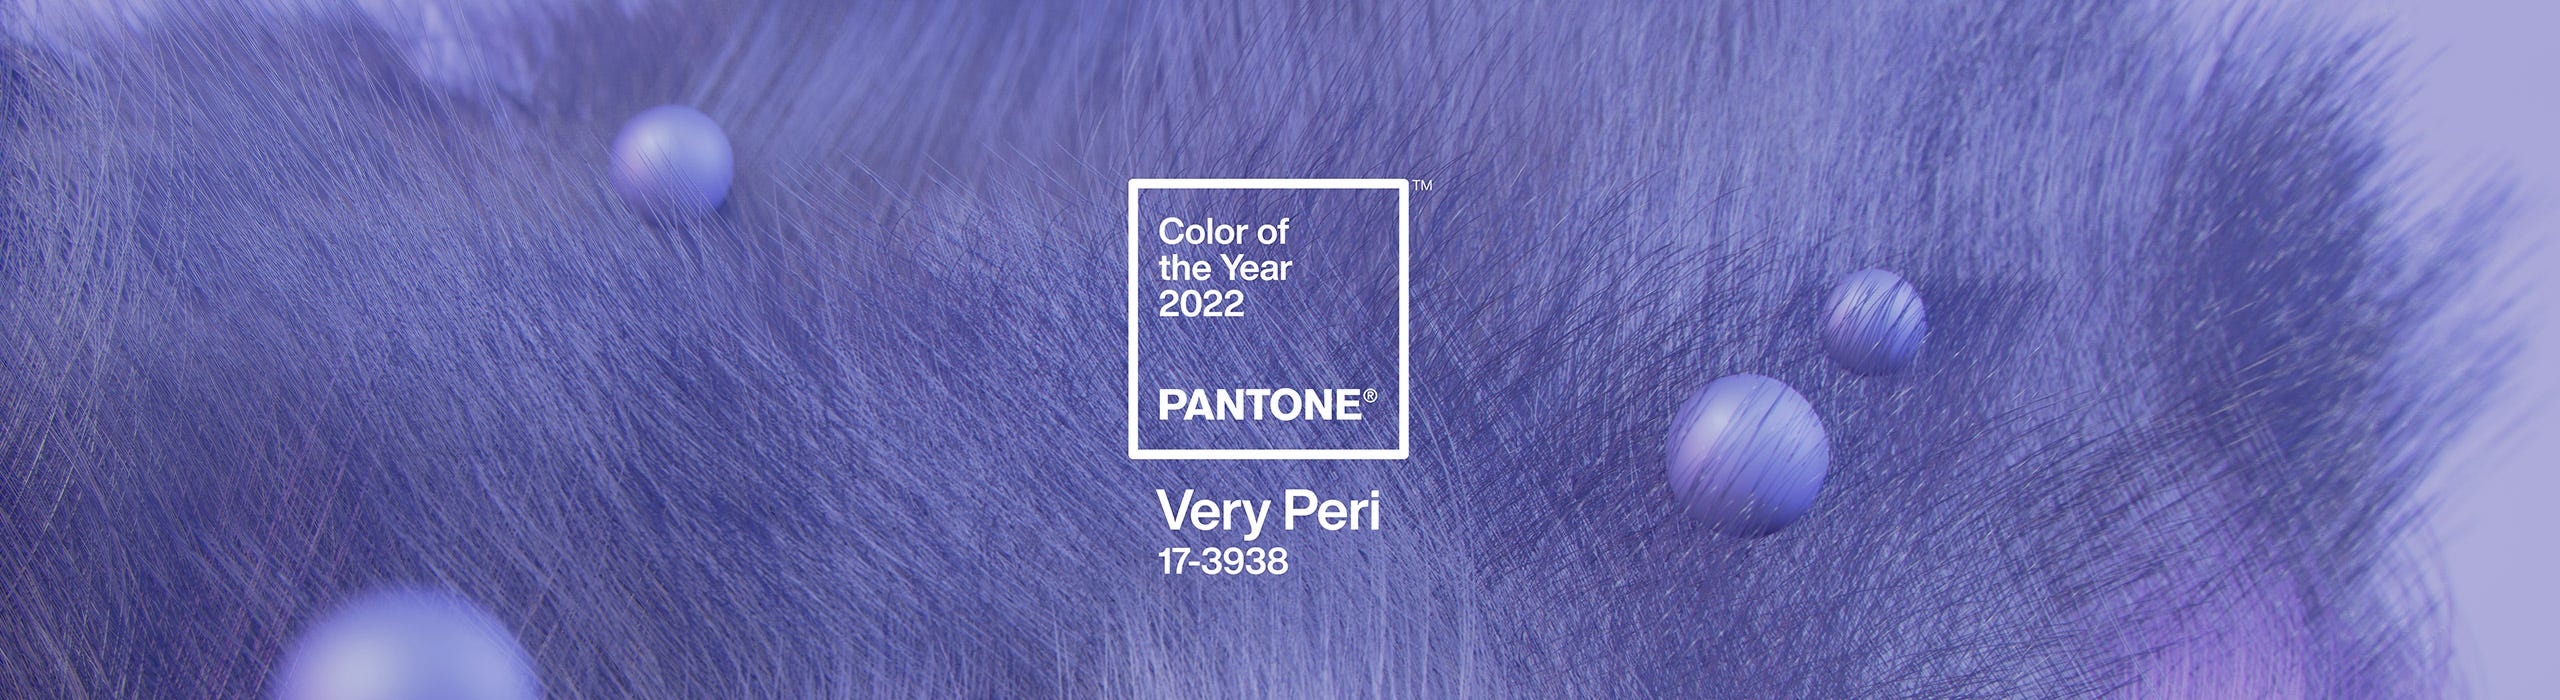 Very Peri is the pantone colour of the year for 2022